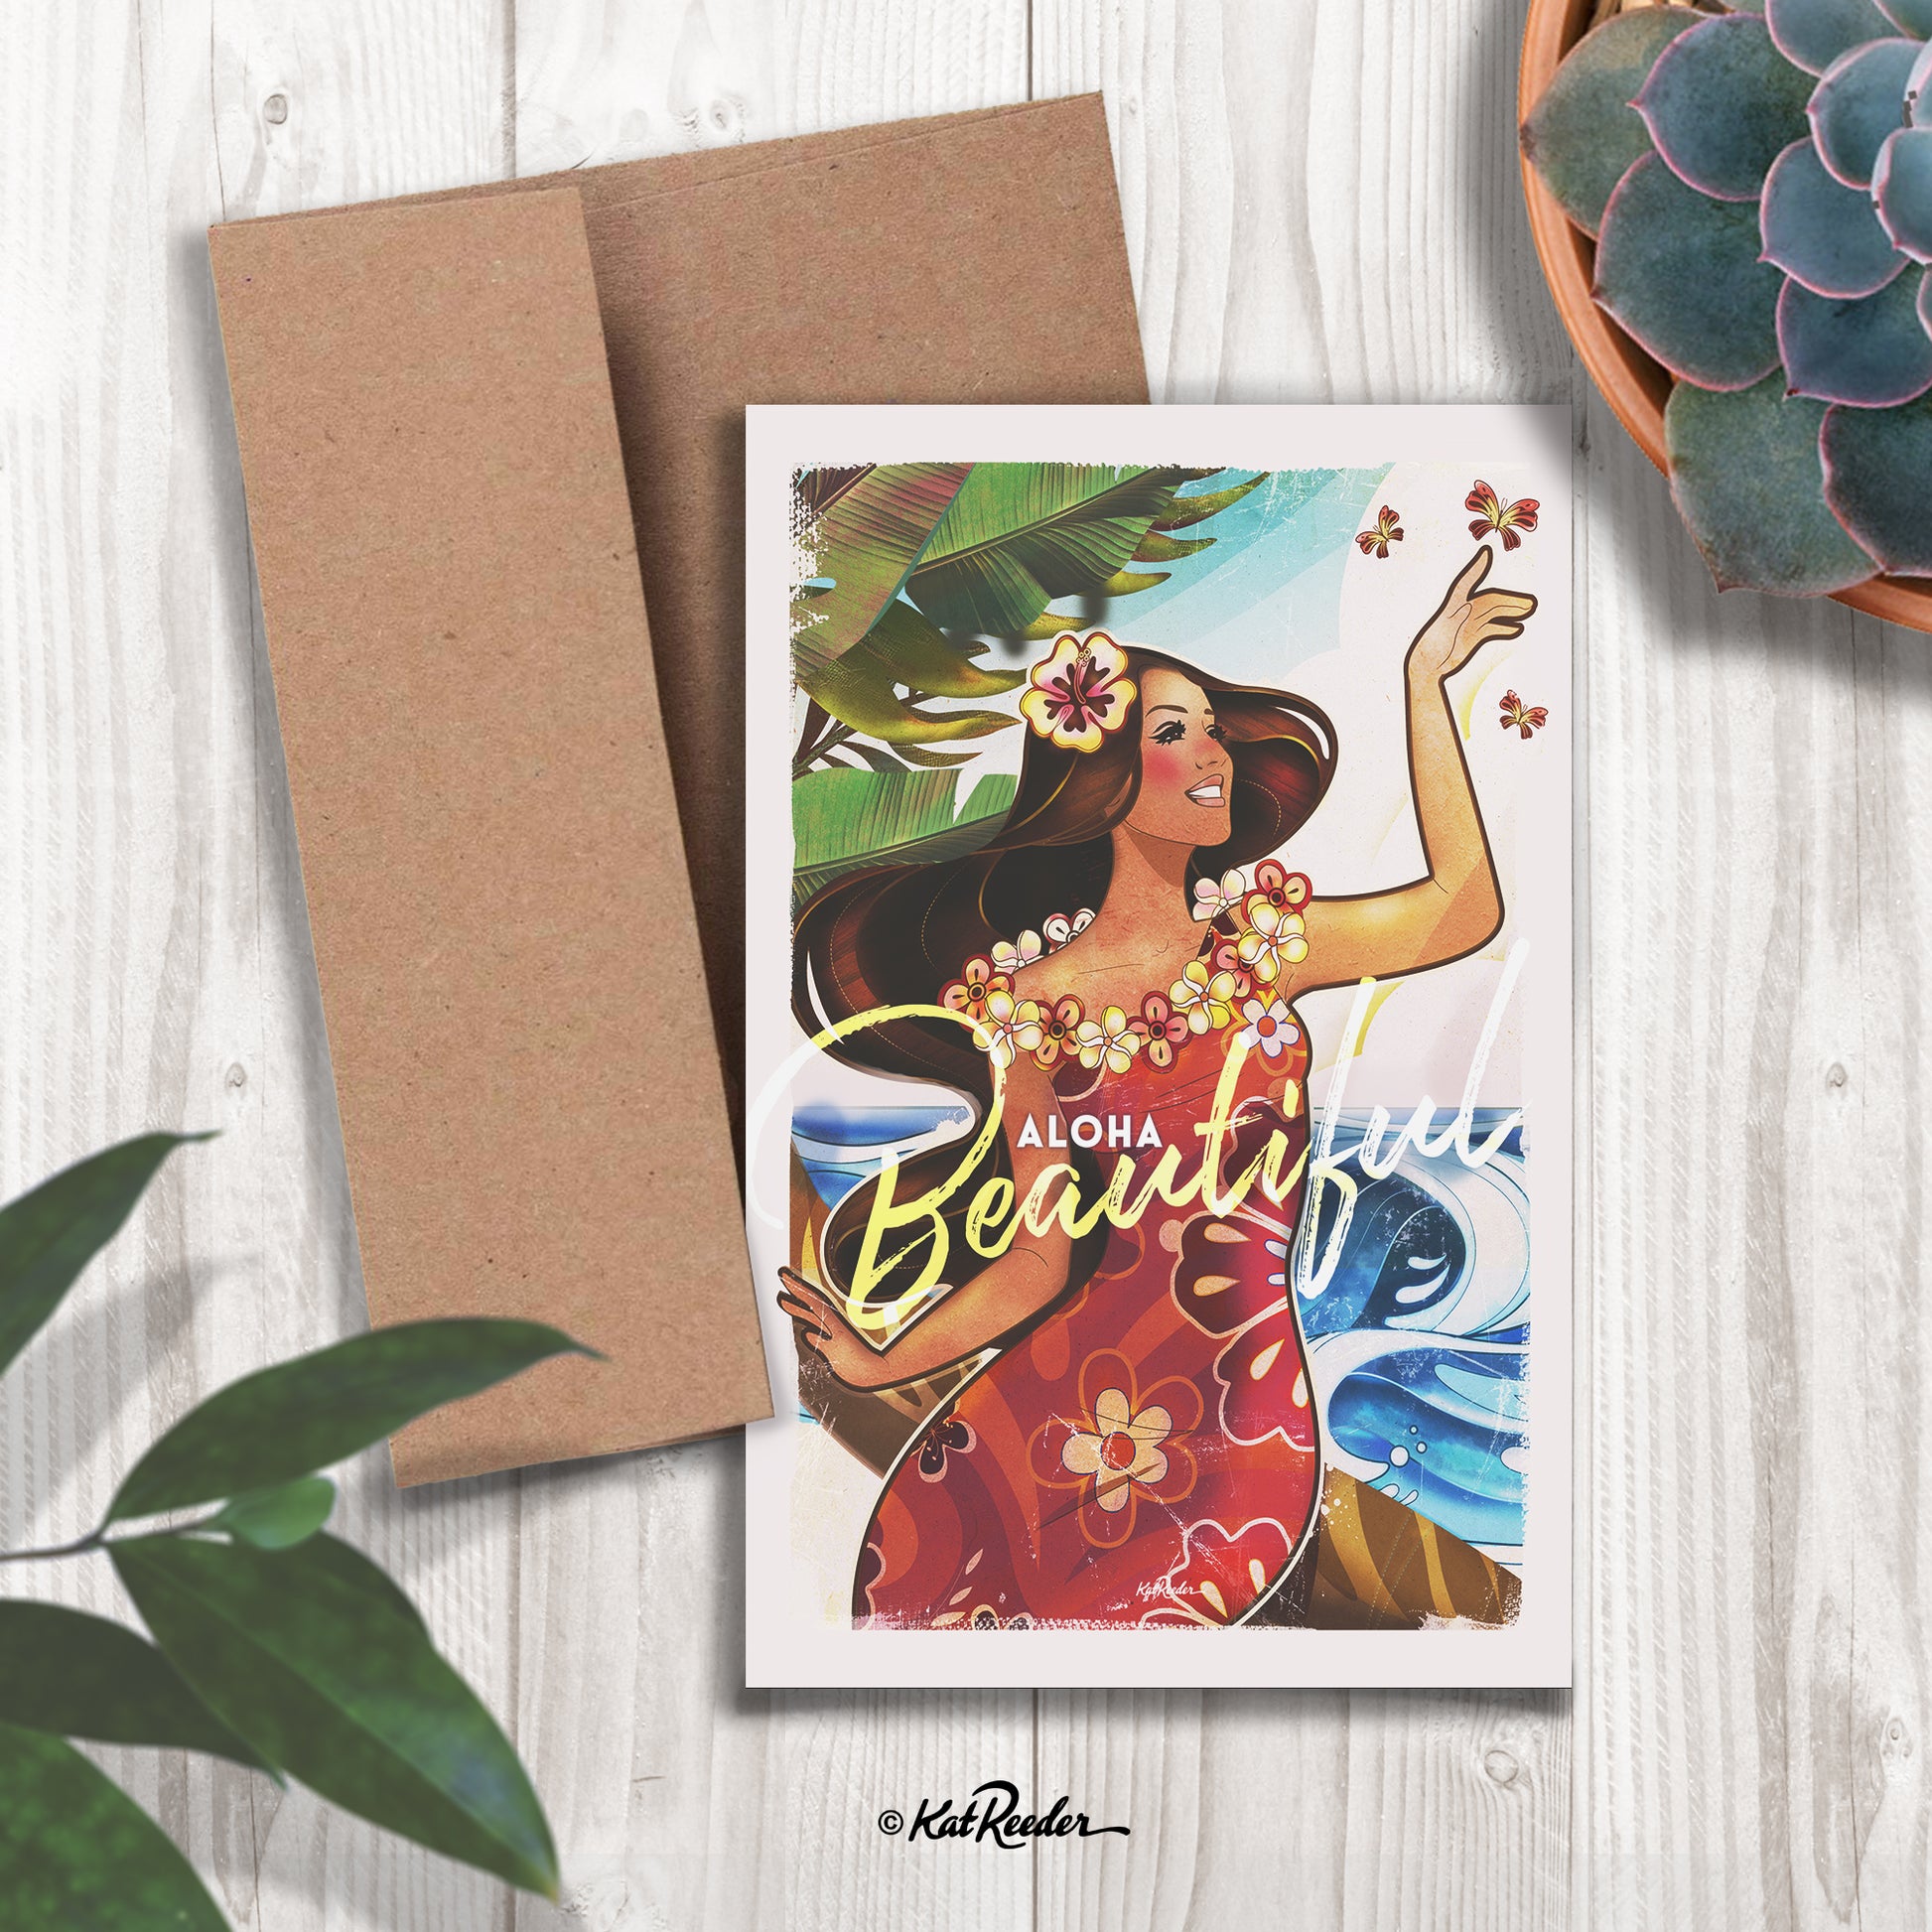 5x7 greeting card featuring an illustration of an island girl holding a butterfly in the style of vintage travel posters. The message on the front of the card reads “Aloha Beautiful". A kraft paper envelope is included with card. 